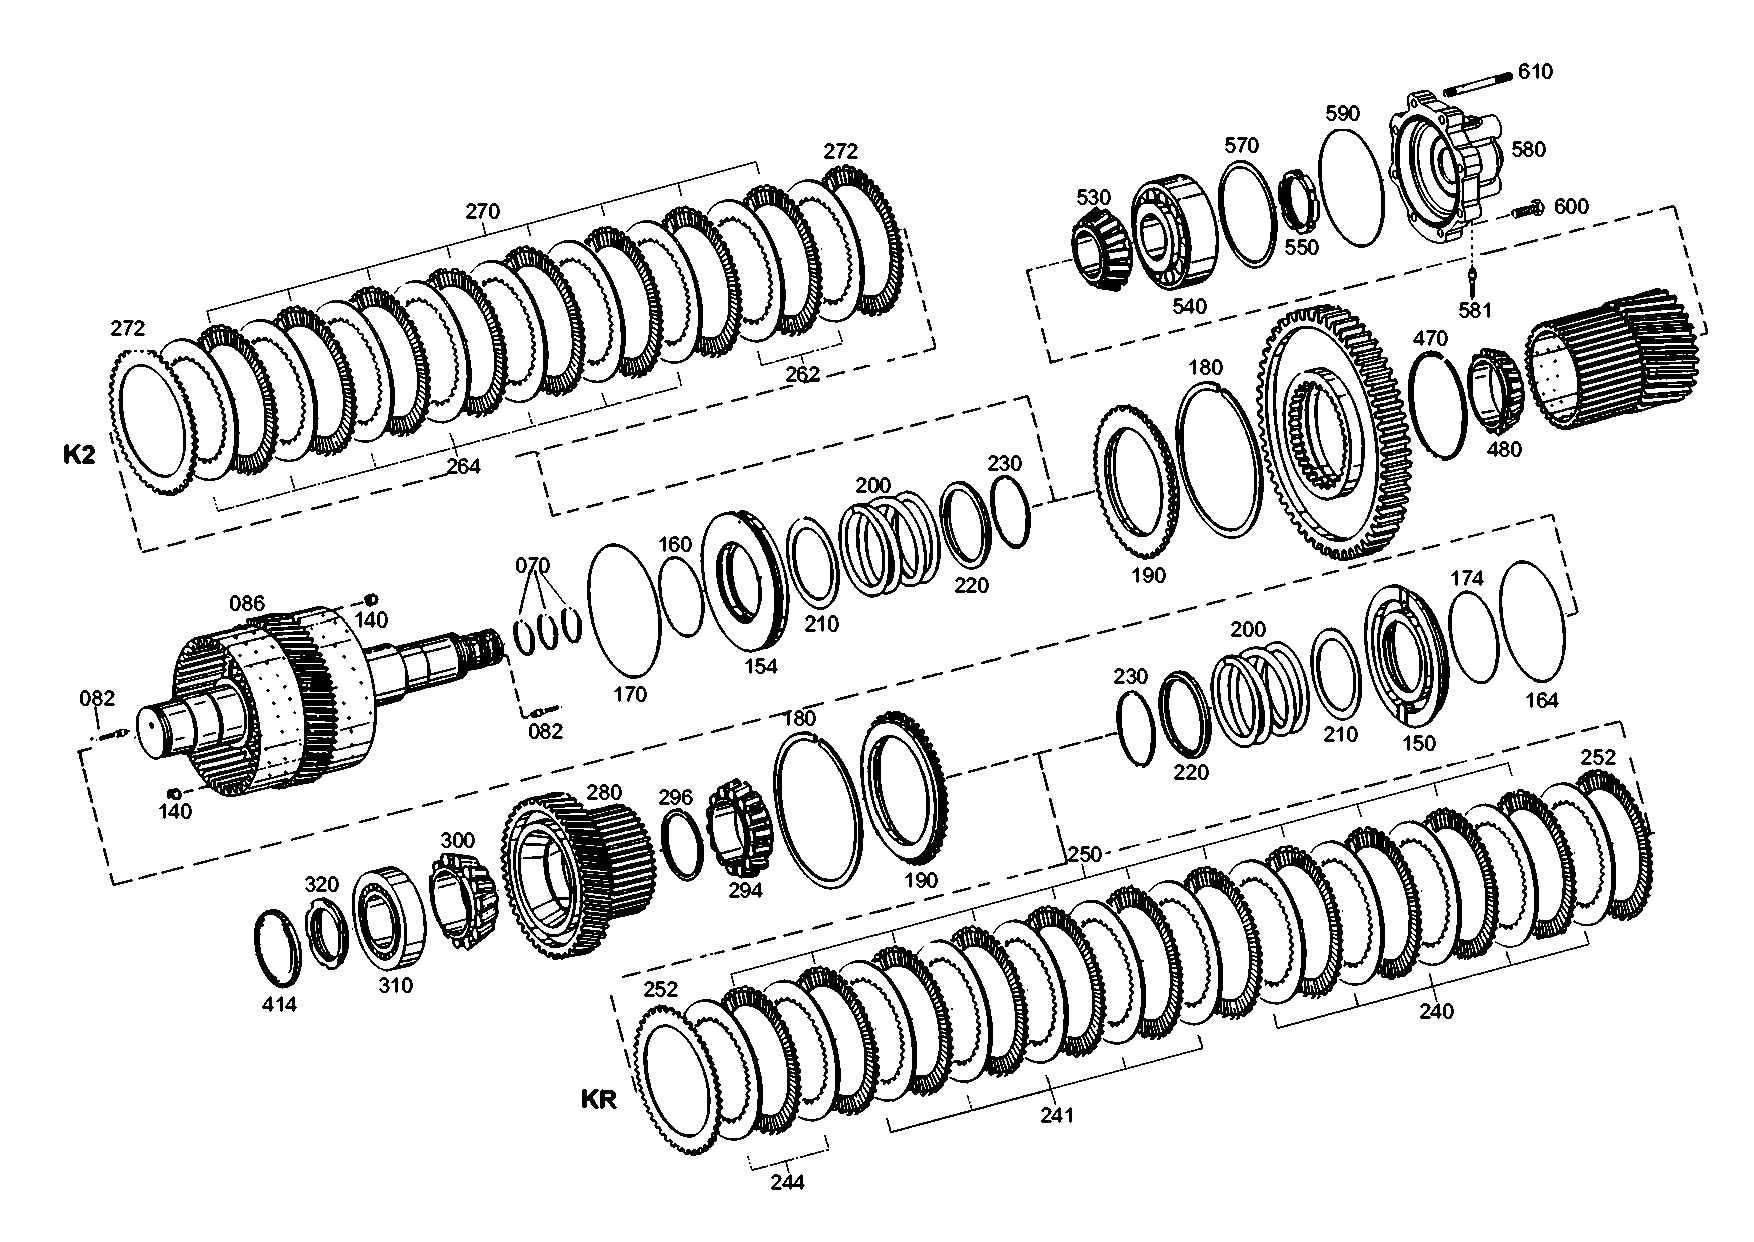 drawing for DOOSAN K9000013 - OUTER CLUTCH DISK (figure 5)